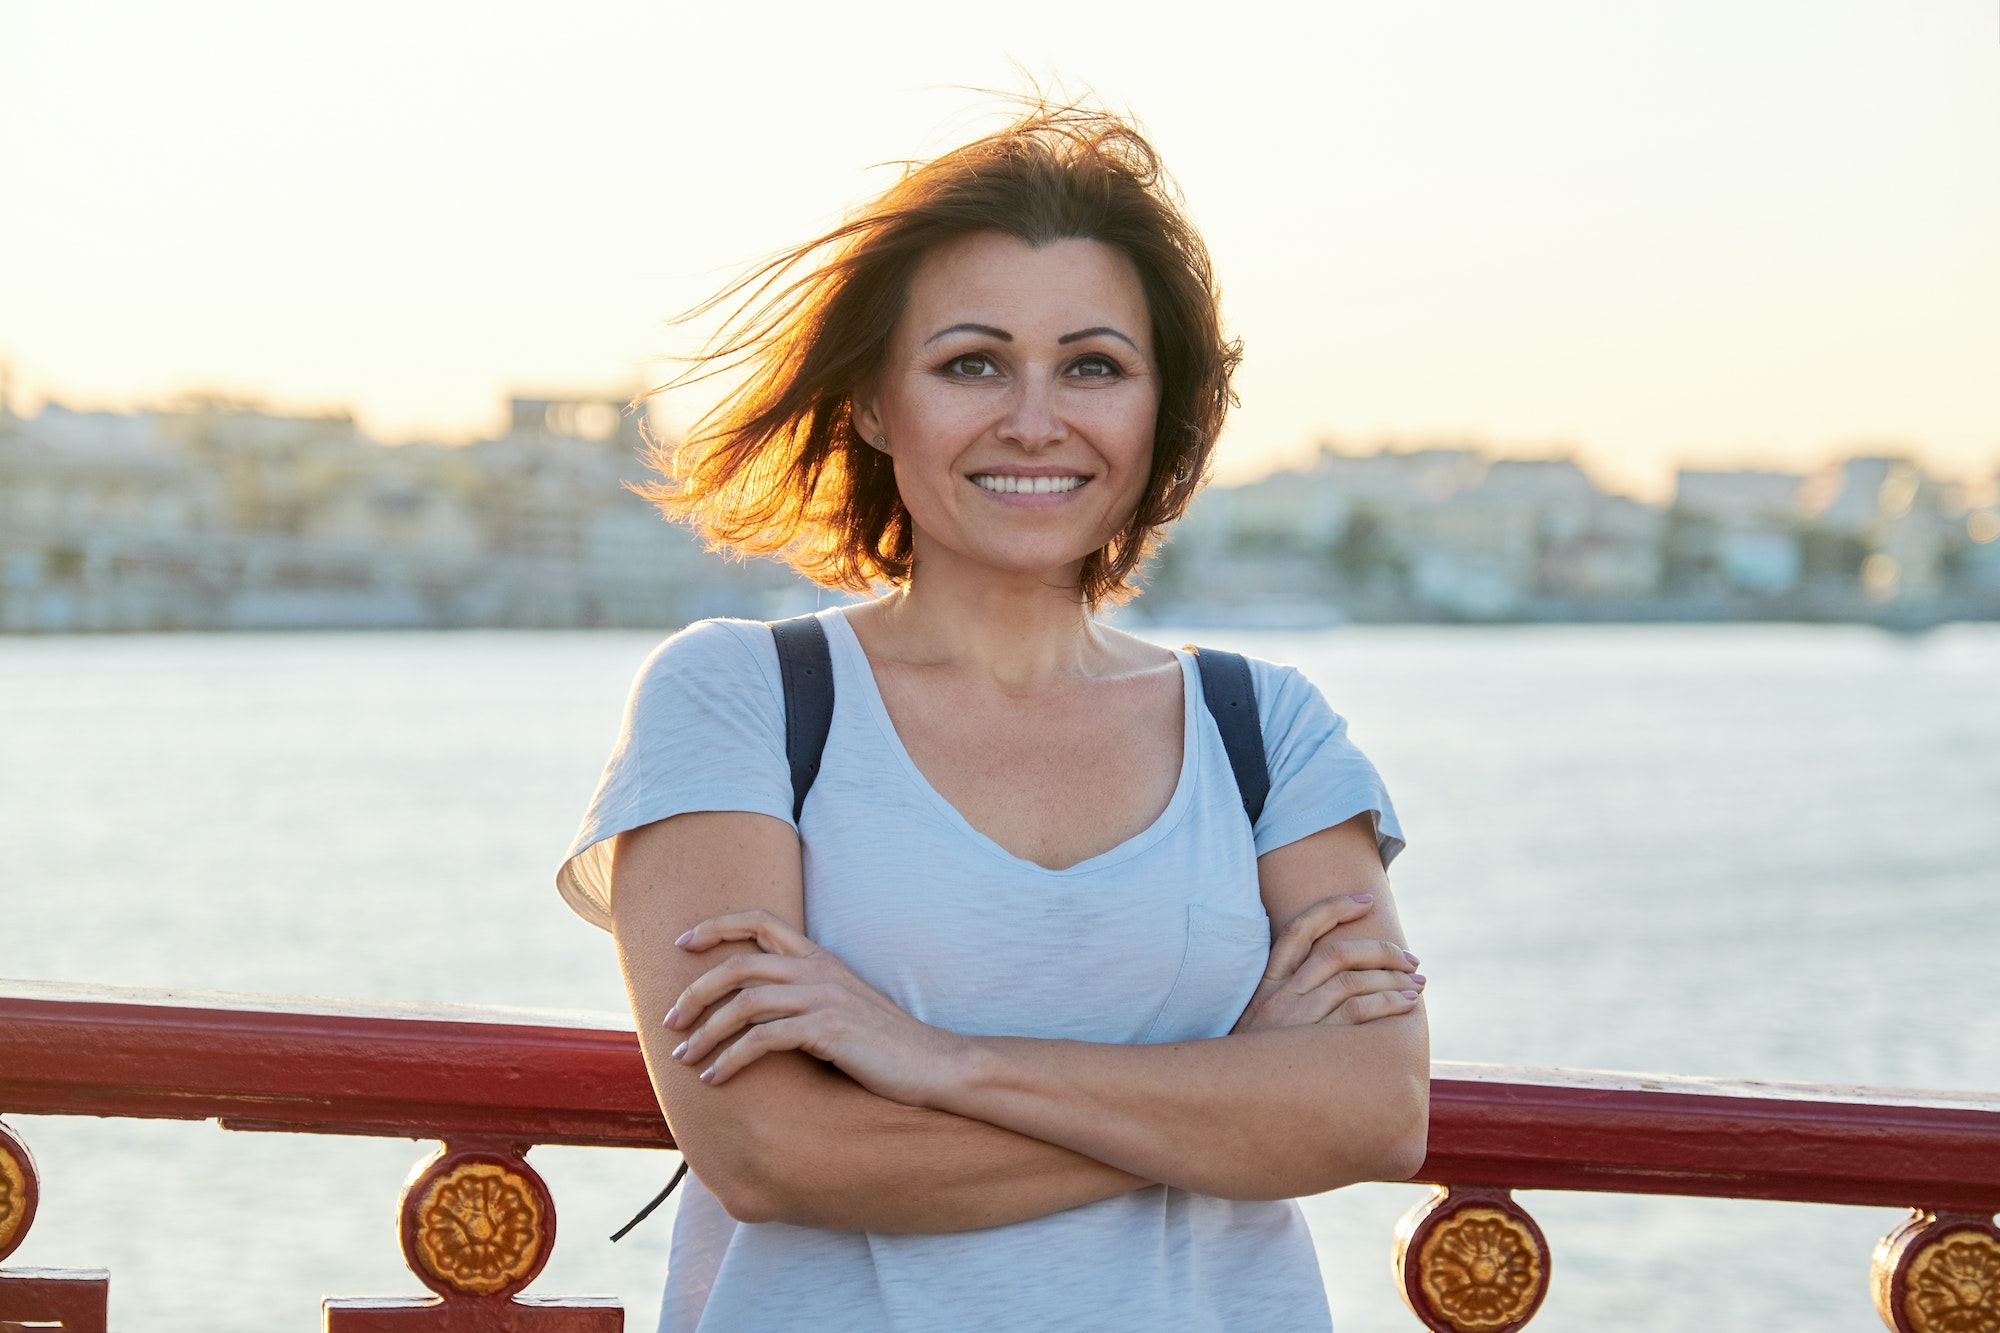 Outdoor portrait of positive smiling middle-aged woman